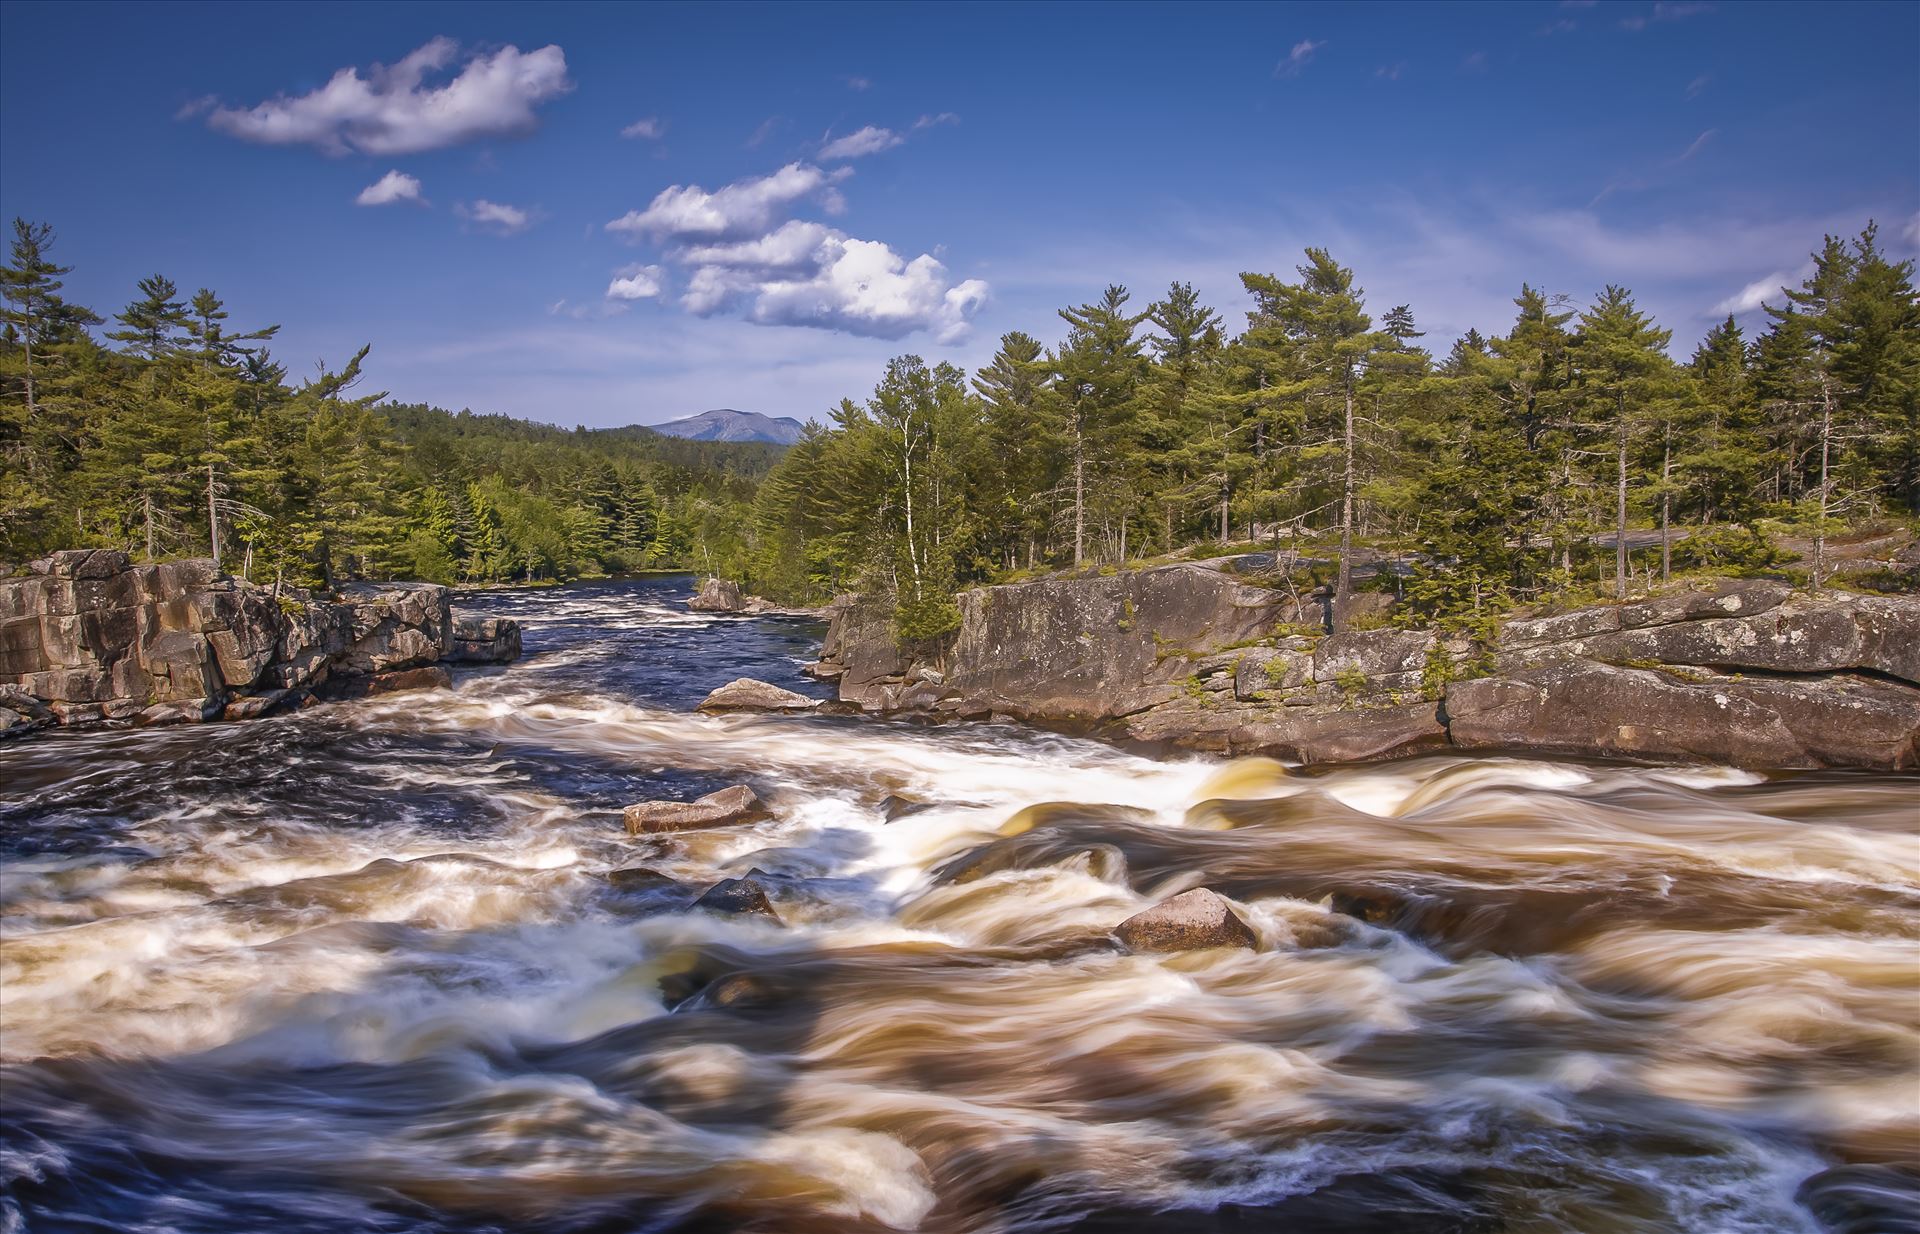 The Cribworks with MT Katahdin "The Cribworks" with Mount Katahdin in Background. Located in Northern Maine on the West Branch Penobscot River by Buckmaster